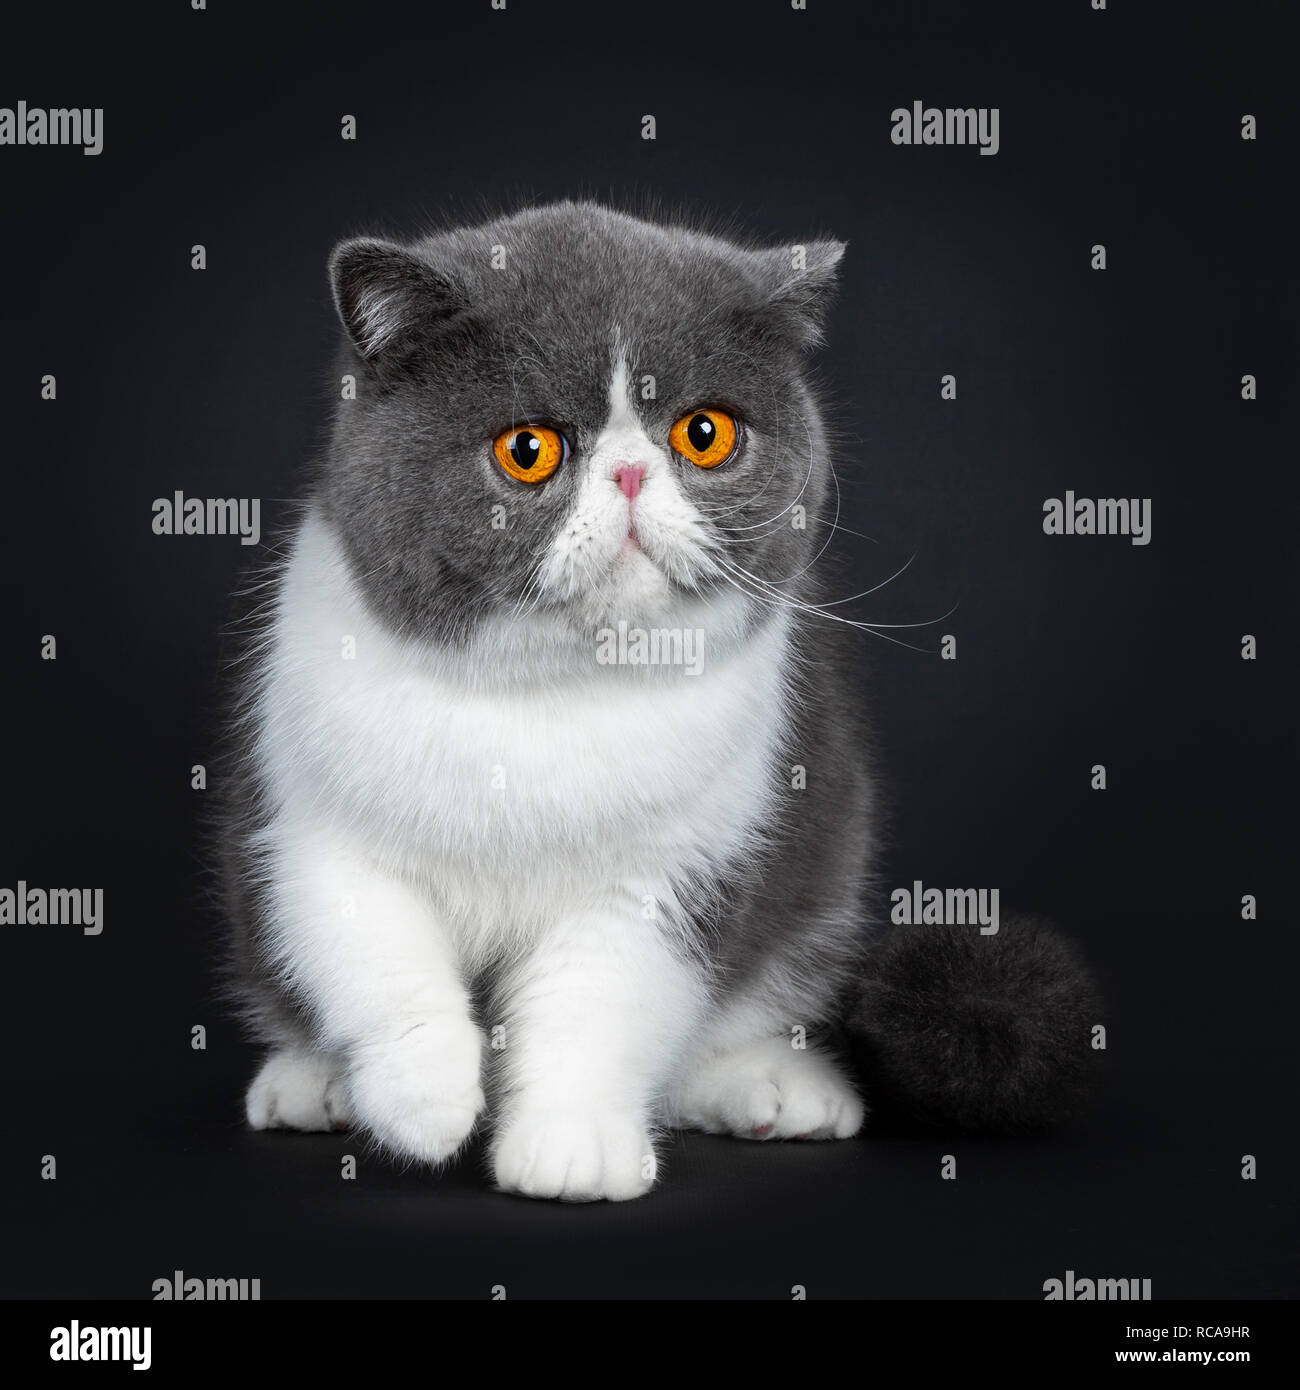 Blue with white cute Exotic shorthair cat kitten sitting facing front, one paw in air. Looking with big round bright orange eyes annoyed at lens. Stock Photo